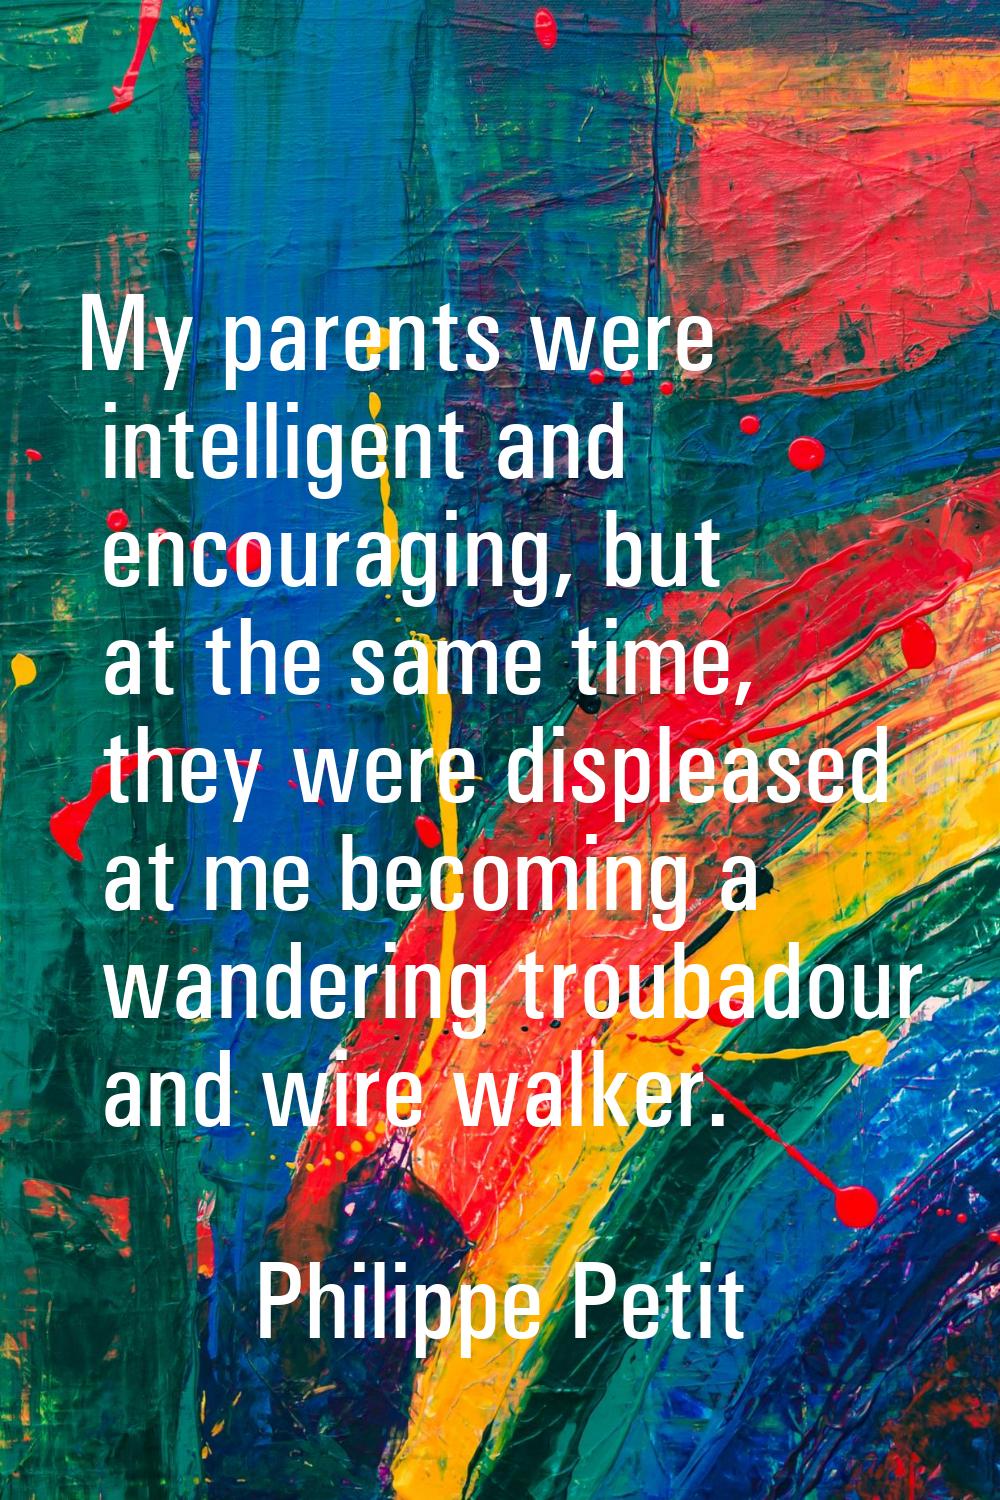 My parents were intelligent and encouraging, but at the same time, they were displeased at me becom